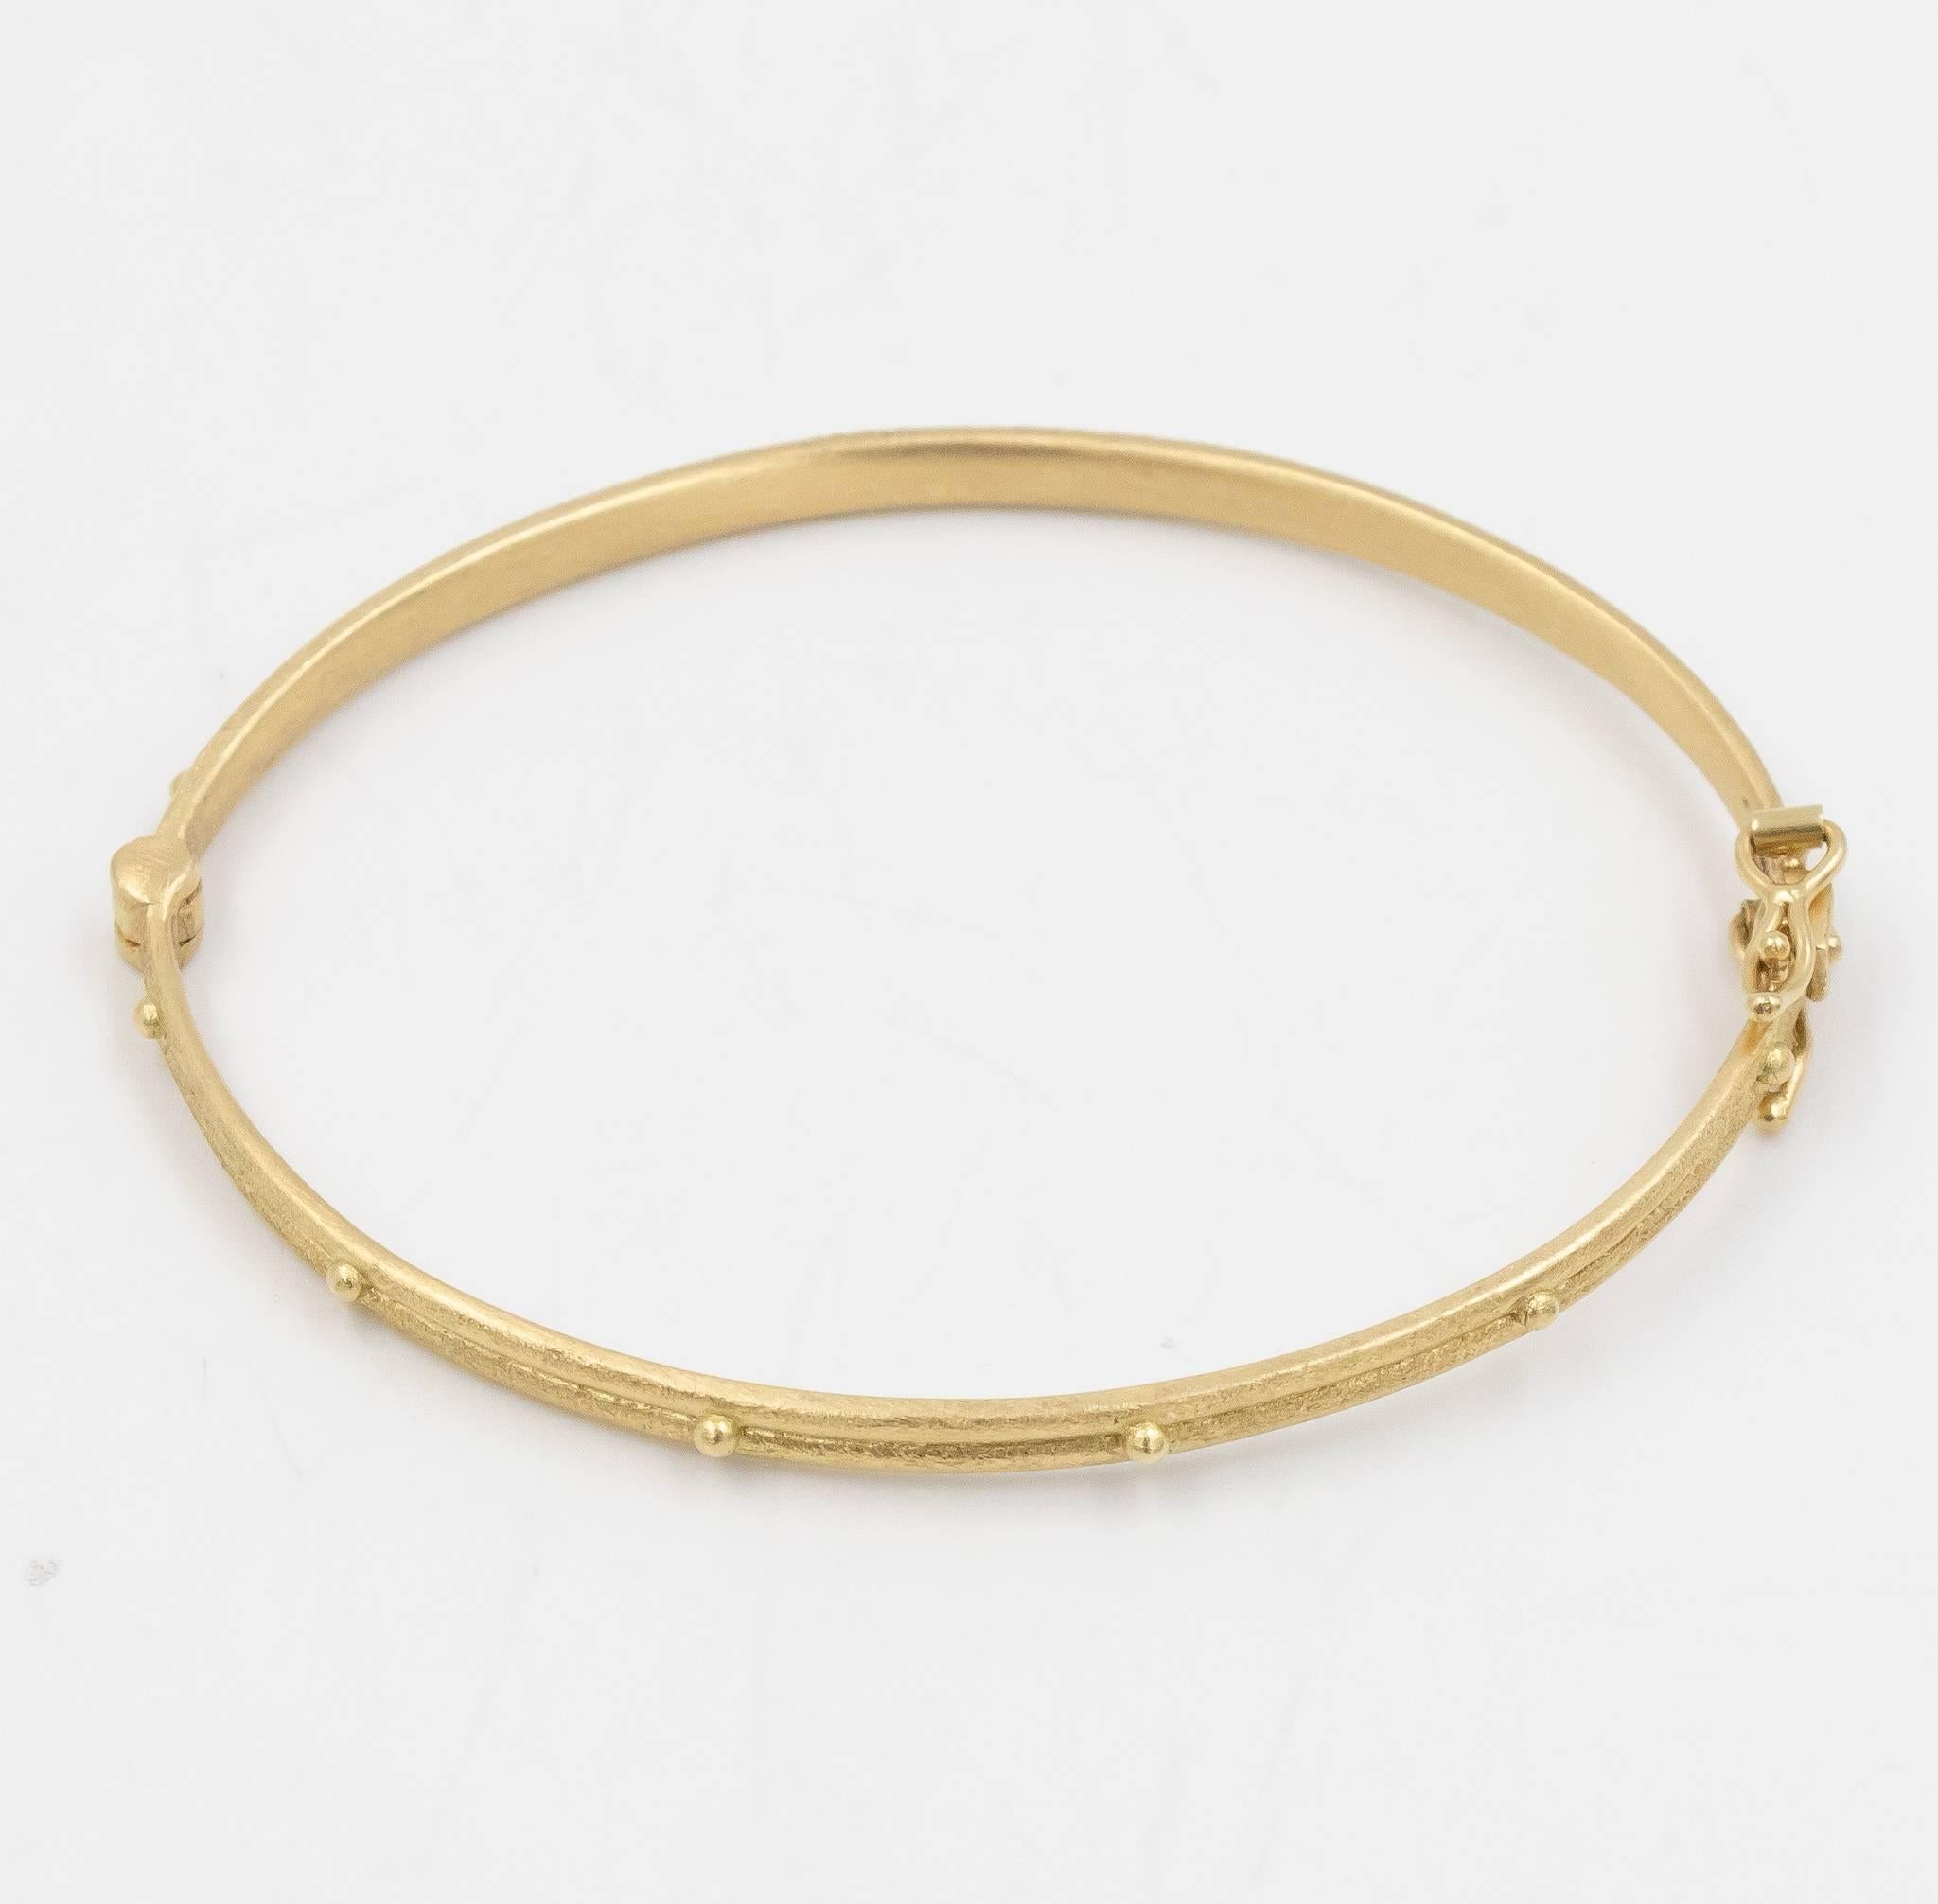 This Armenta bangle with granulation decorated around the design is a fun and elegant piece for any occasion.  These bracelets wear very nicely on their own or stacked with other complimentary Armenta styles. This 02692 design features a hinge clasp